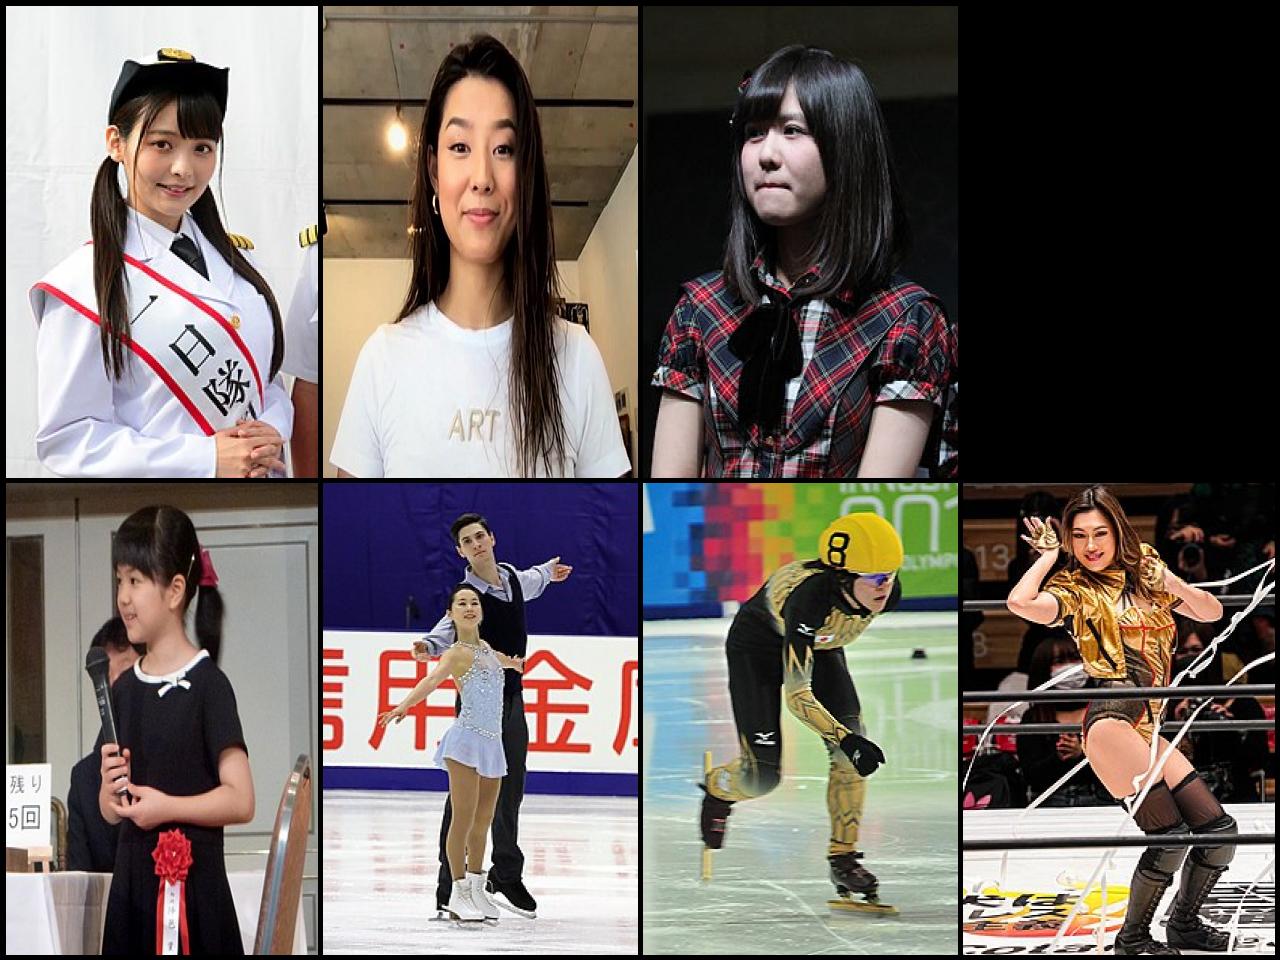 List of Famous people named <b>Sumire</b>